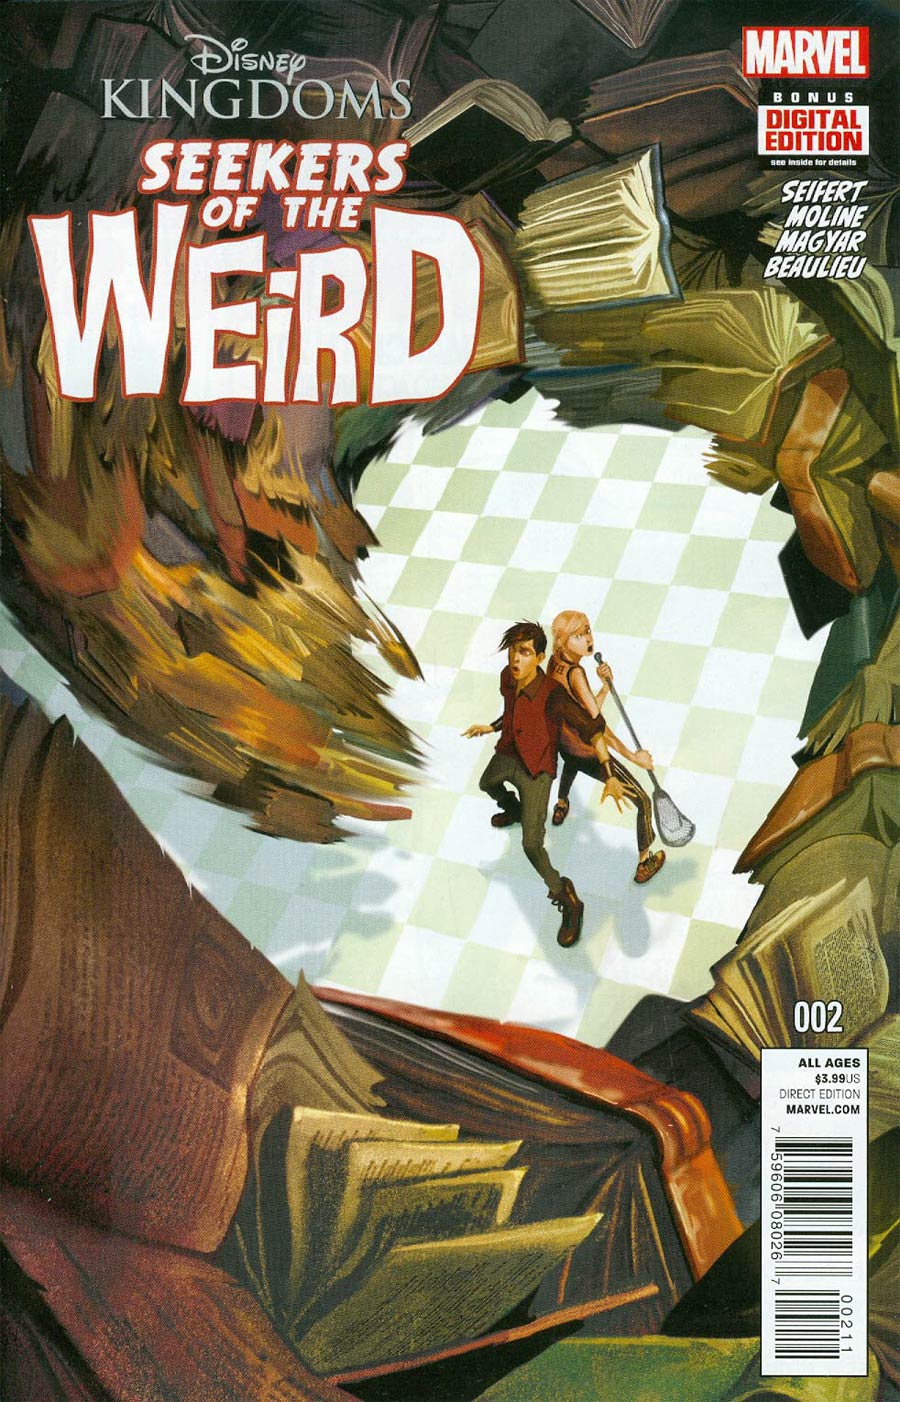 Disney Kingdoms Seekers Of The Weird #2 Cover A Regular Mike Del Mundo Cover